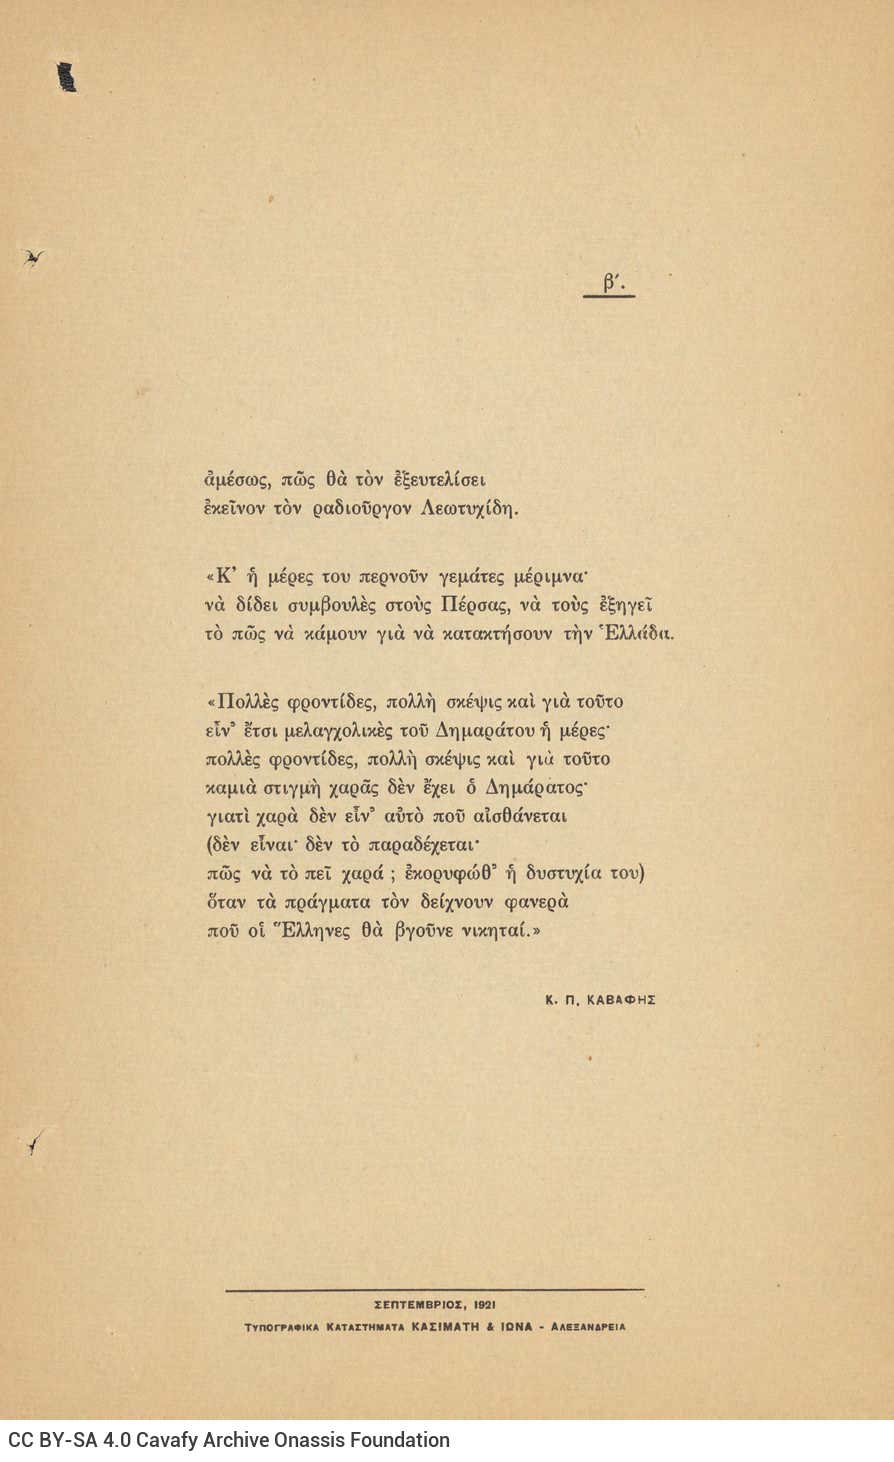 Collection of poems by Cavafy, comprising loose printed broadsheets. It contains 70 poems. All broadsheets (except for the fi